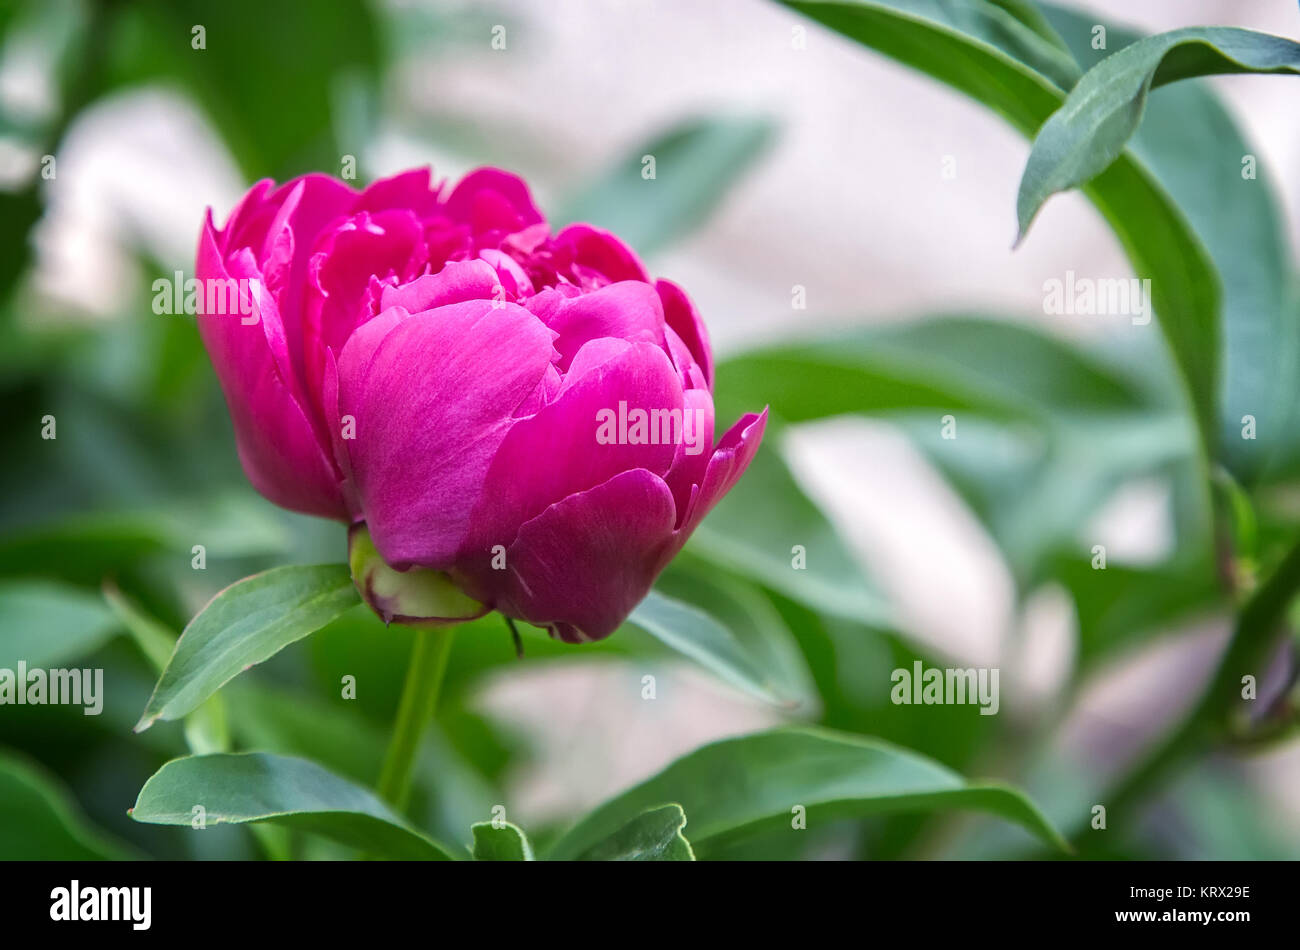 Beautiful big red peony blooming in the garden among green leaves , photographed in close-up. Stock Photo